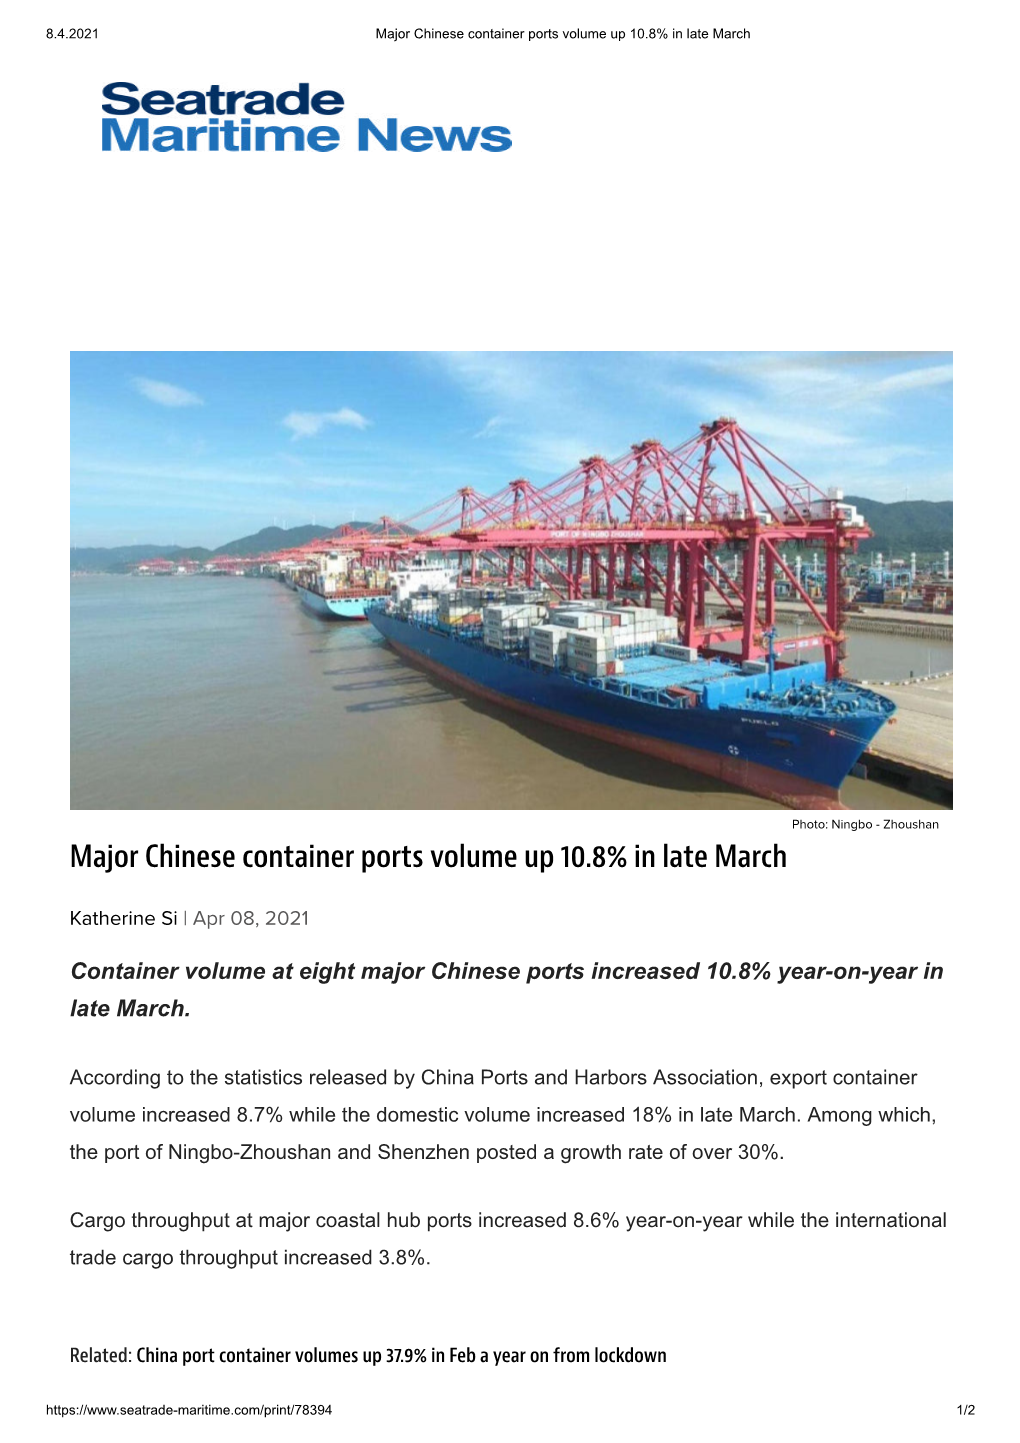 Major Chinese Container Ports Volume up 10.8% in Late March